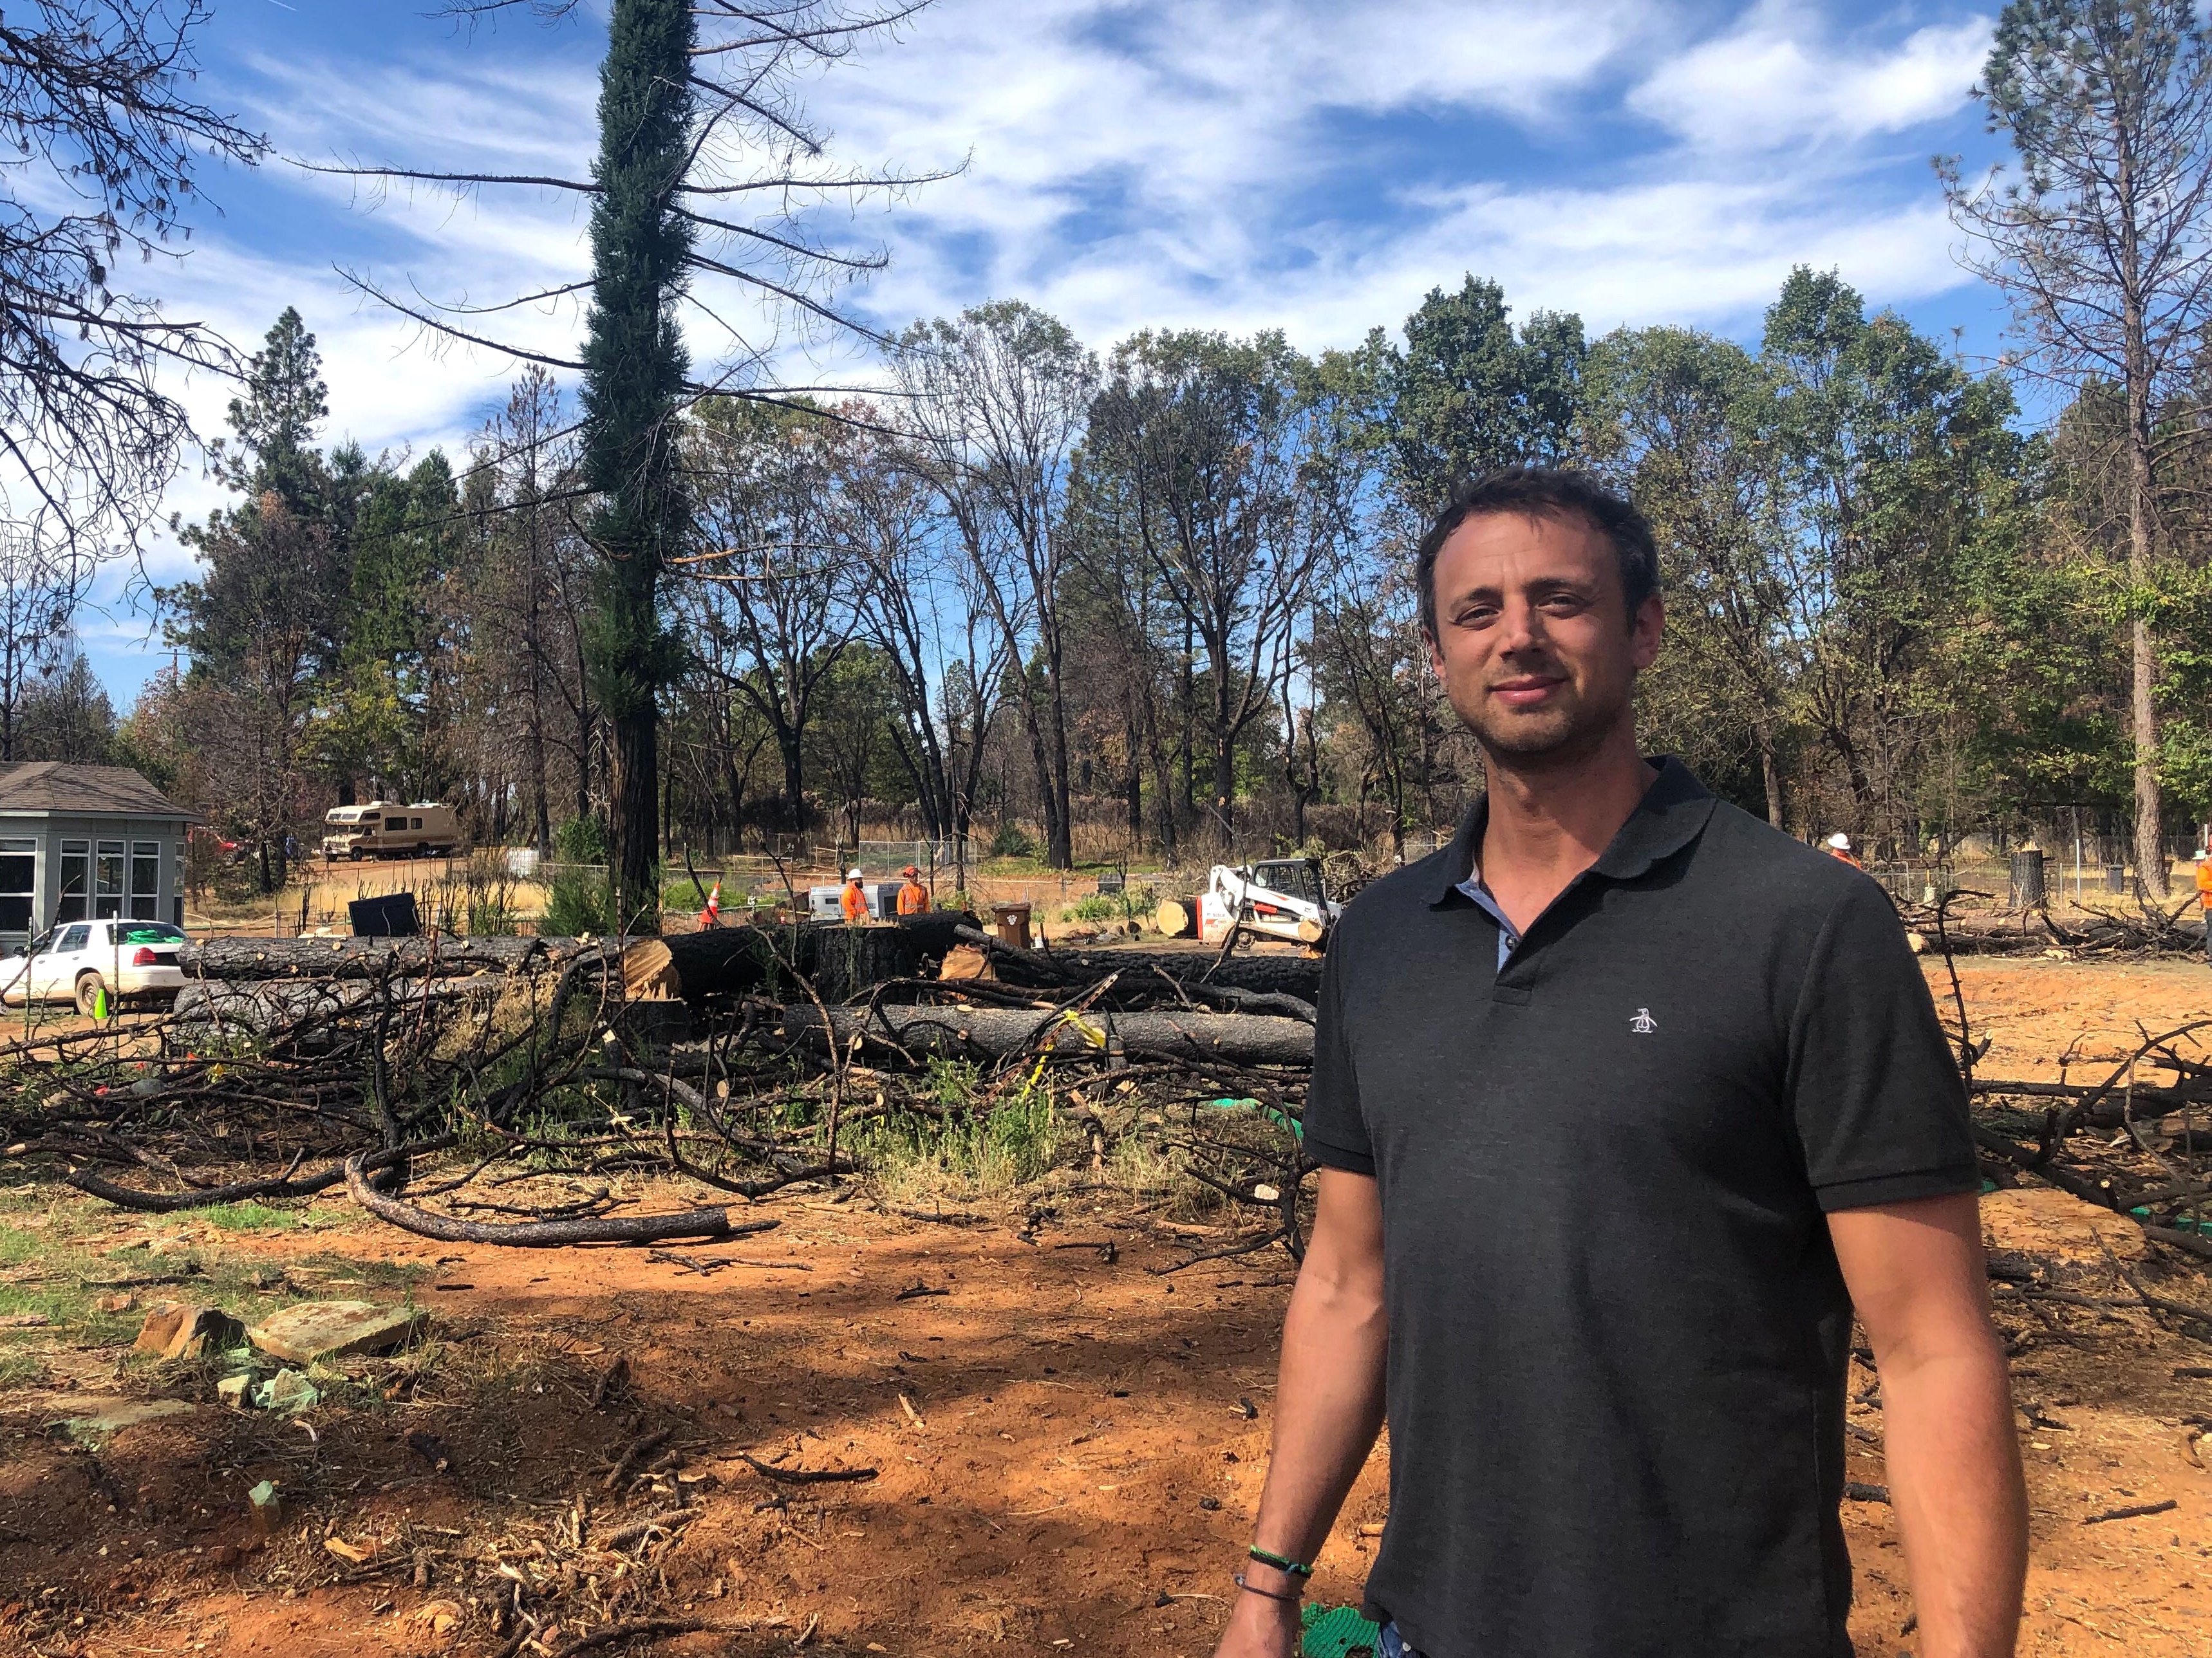 Paradise resident helping town rebuild 5 years after deadly Camp Fire